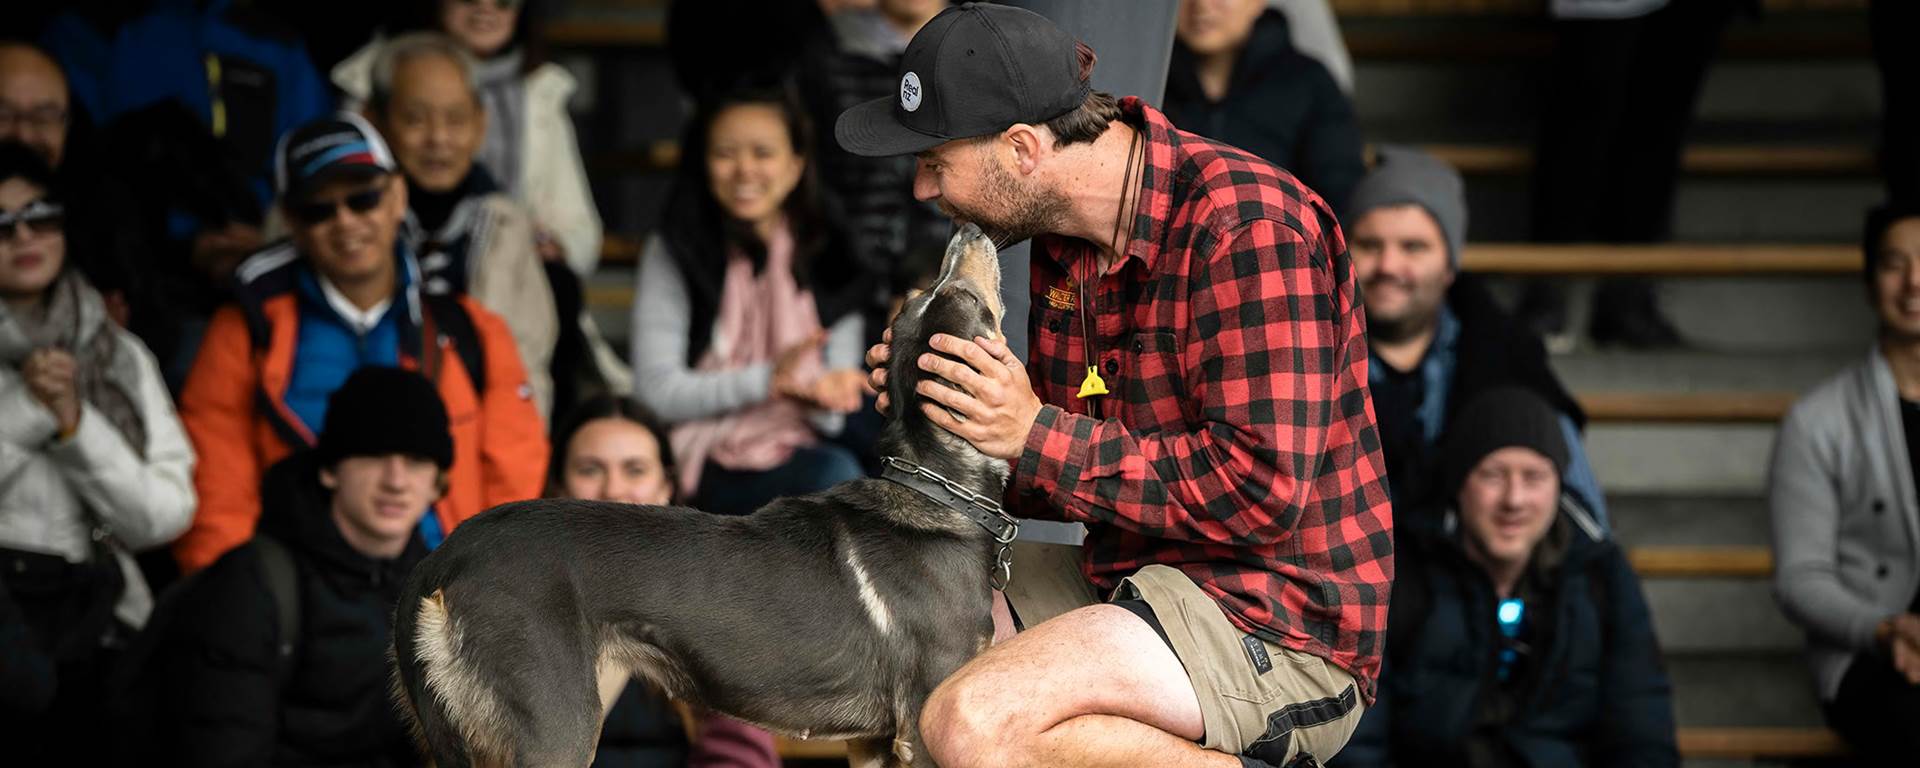 A realnz team member pats his sheepdog in front of crowd